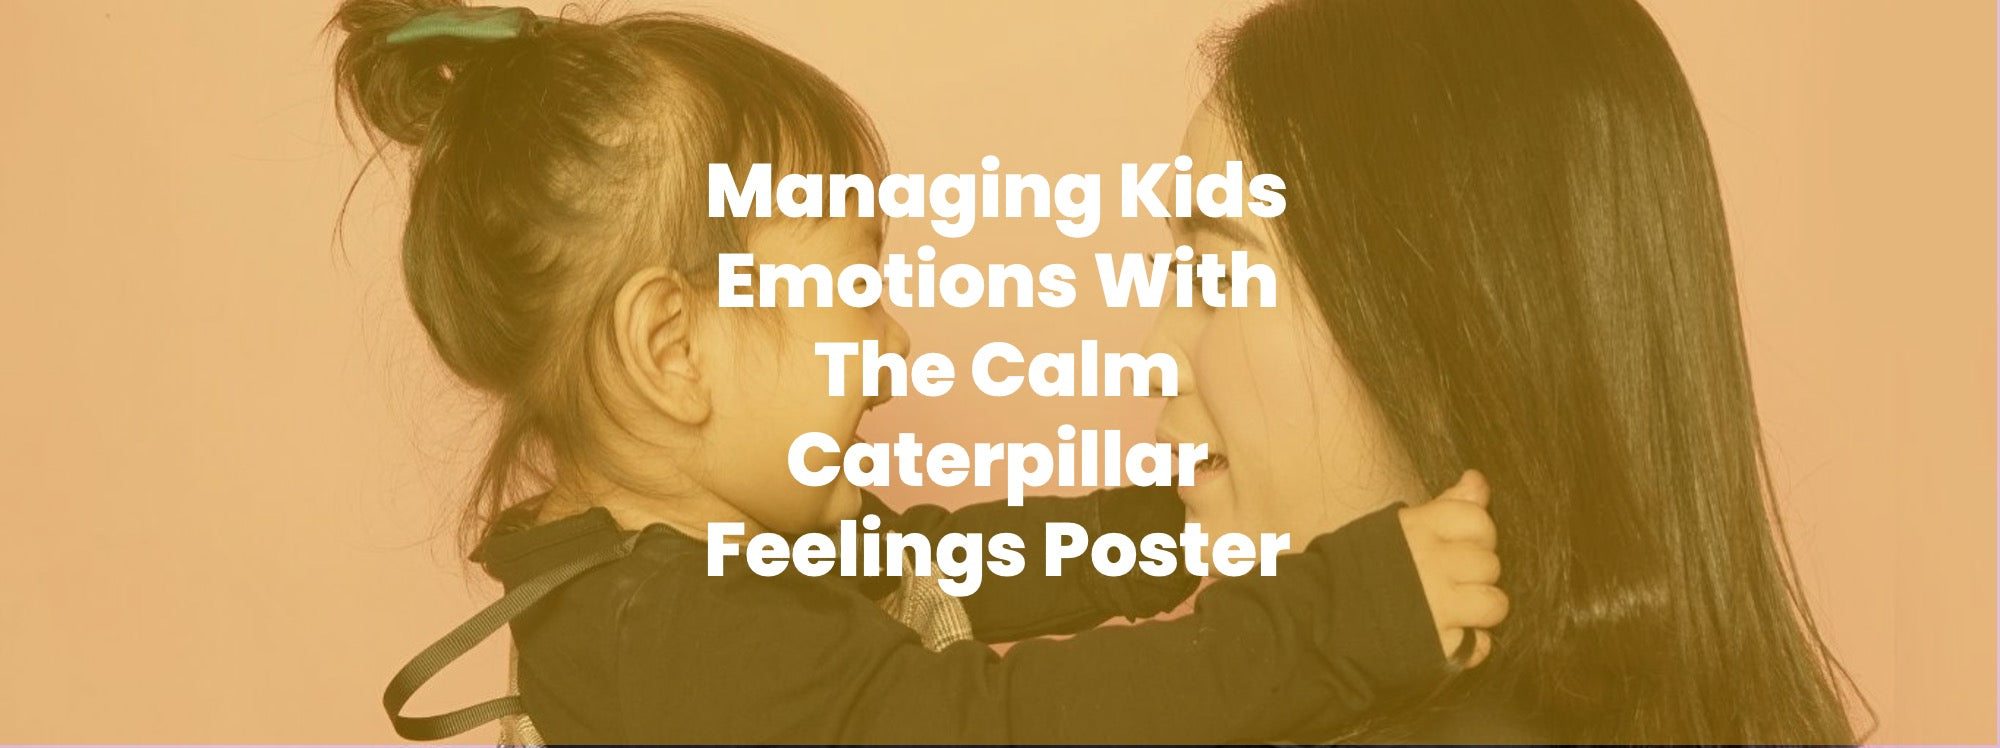 Managing Kids Emotions With The Calm Caterpillar Feelings Poster